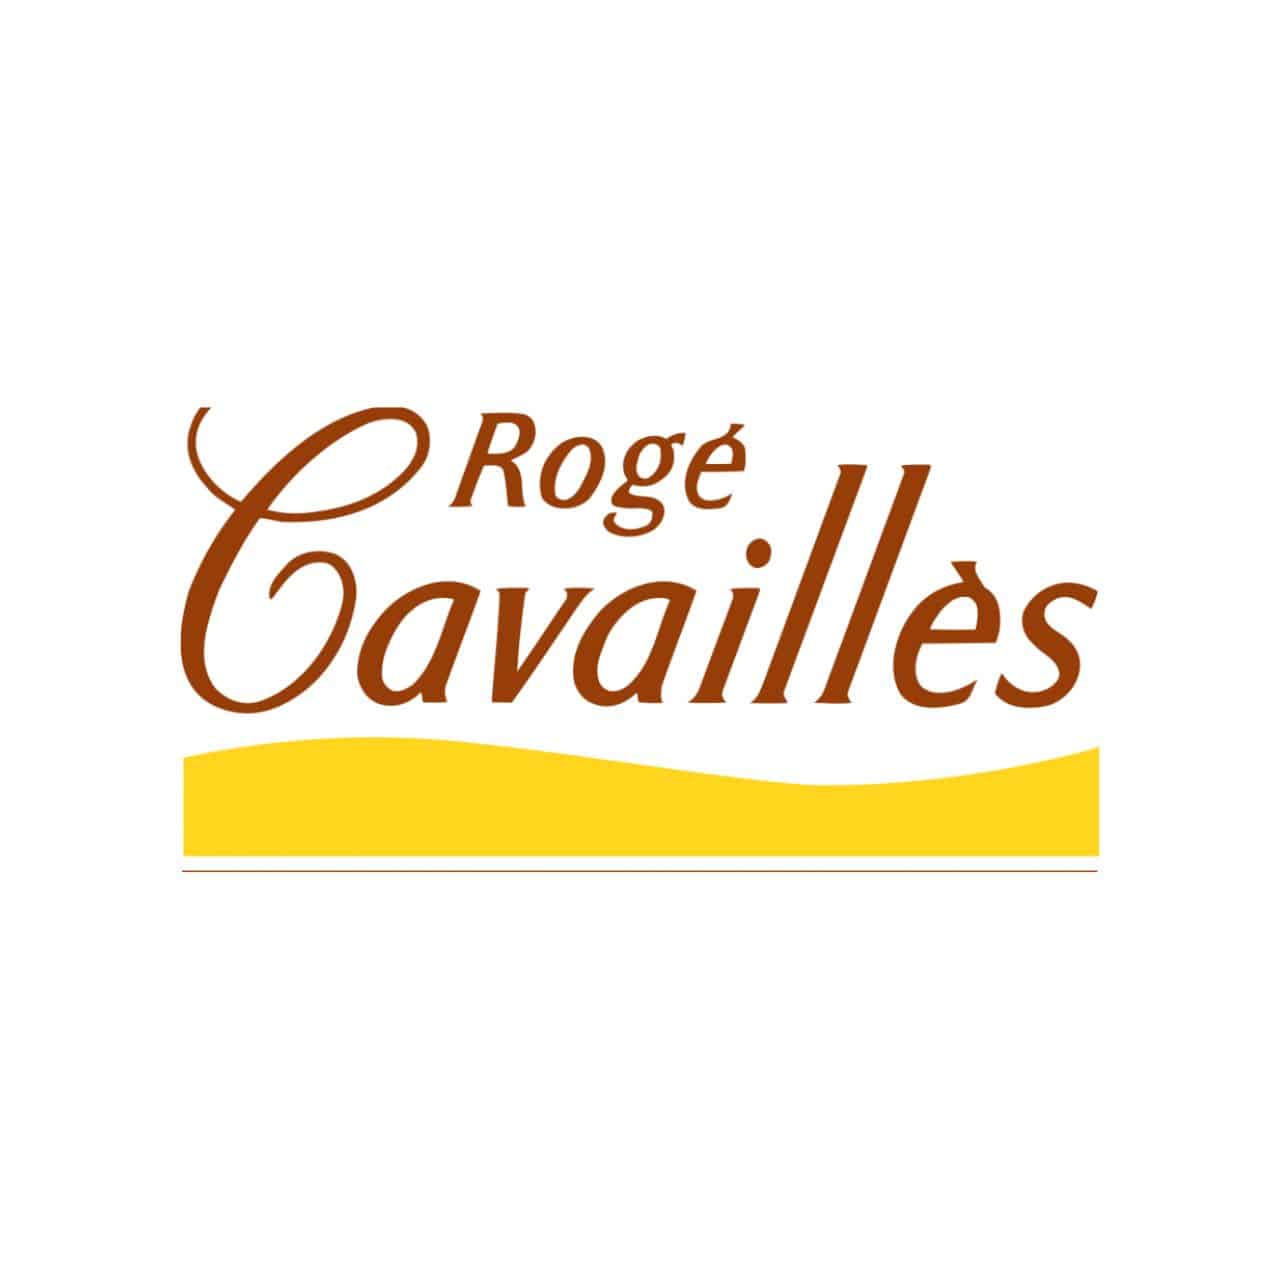 roge-gavailles